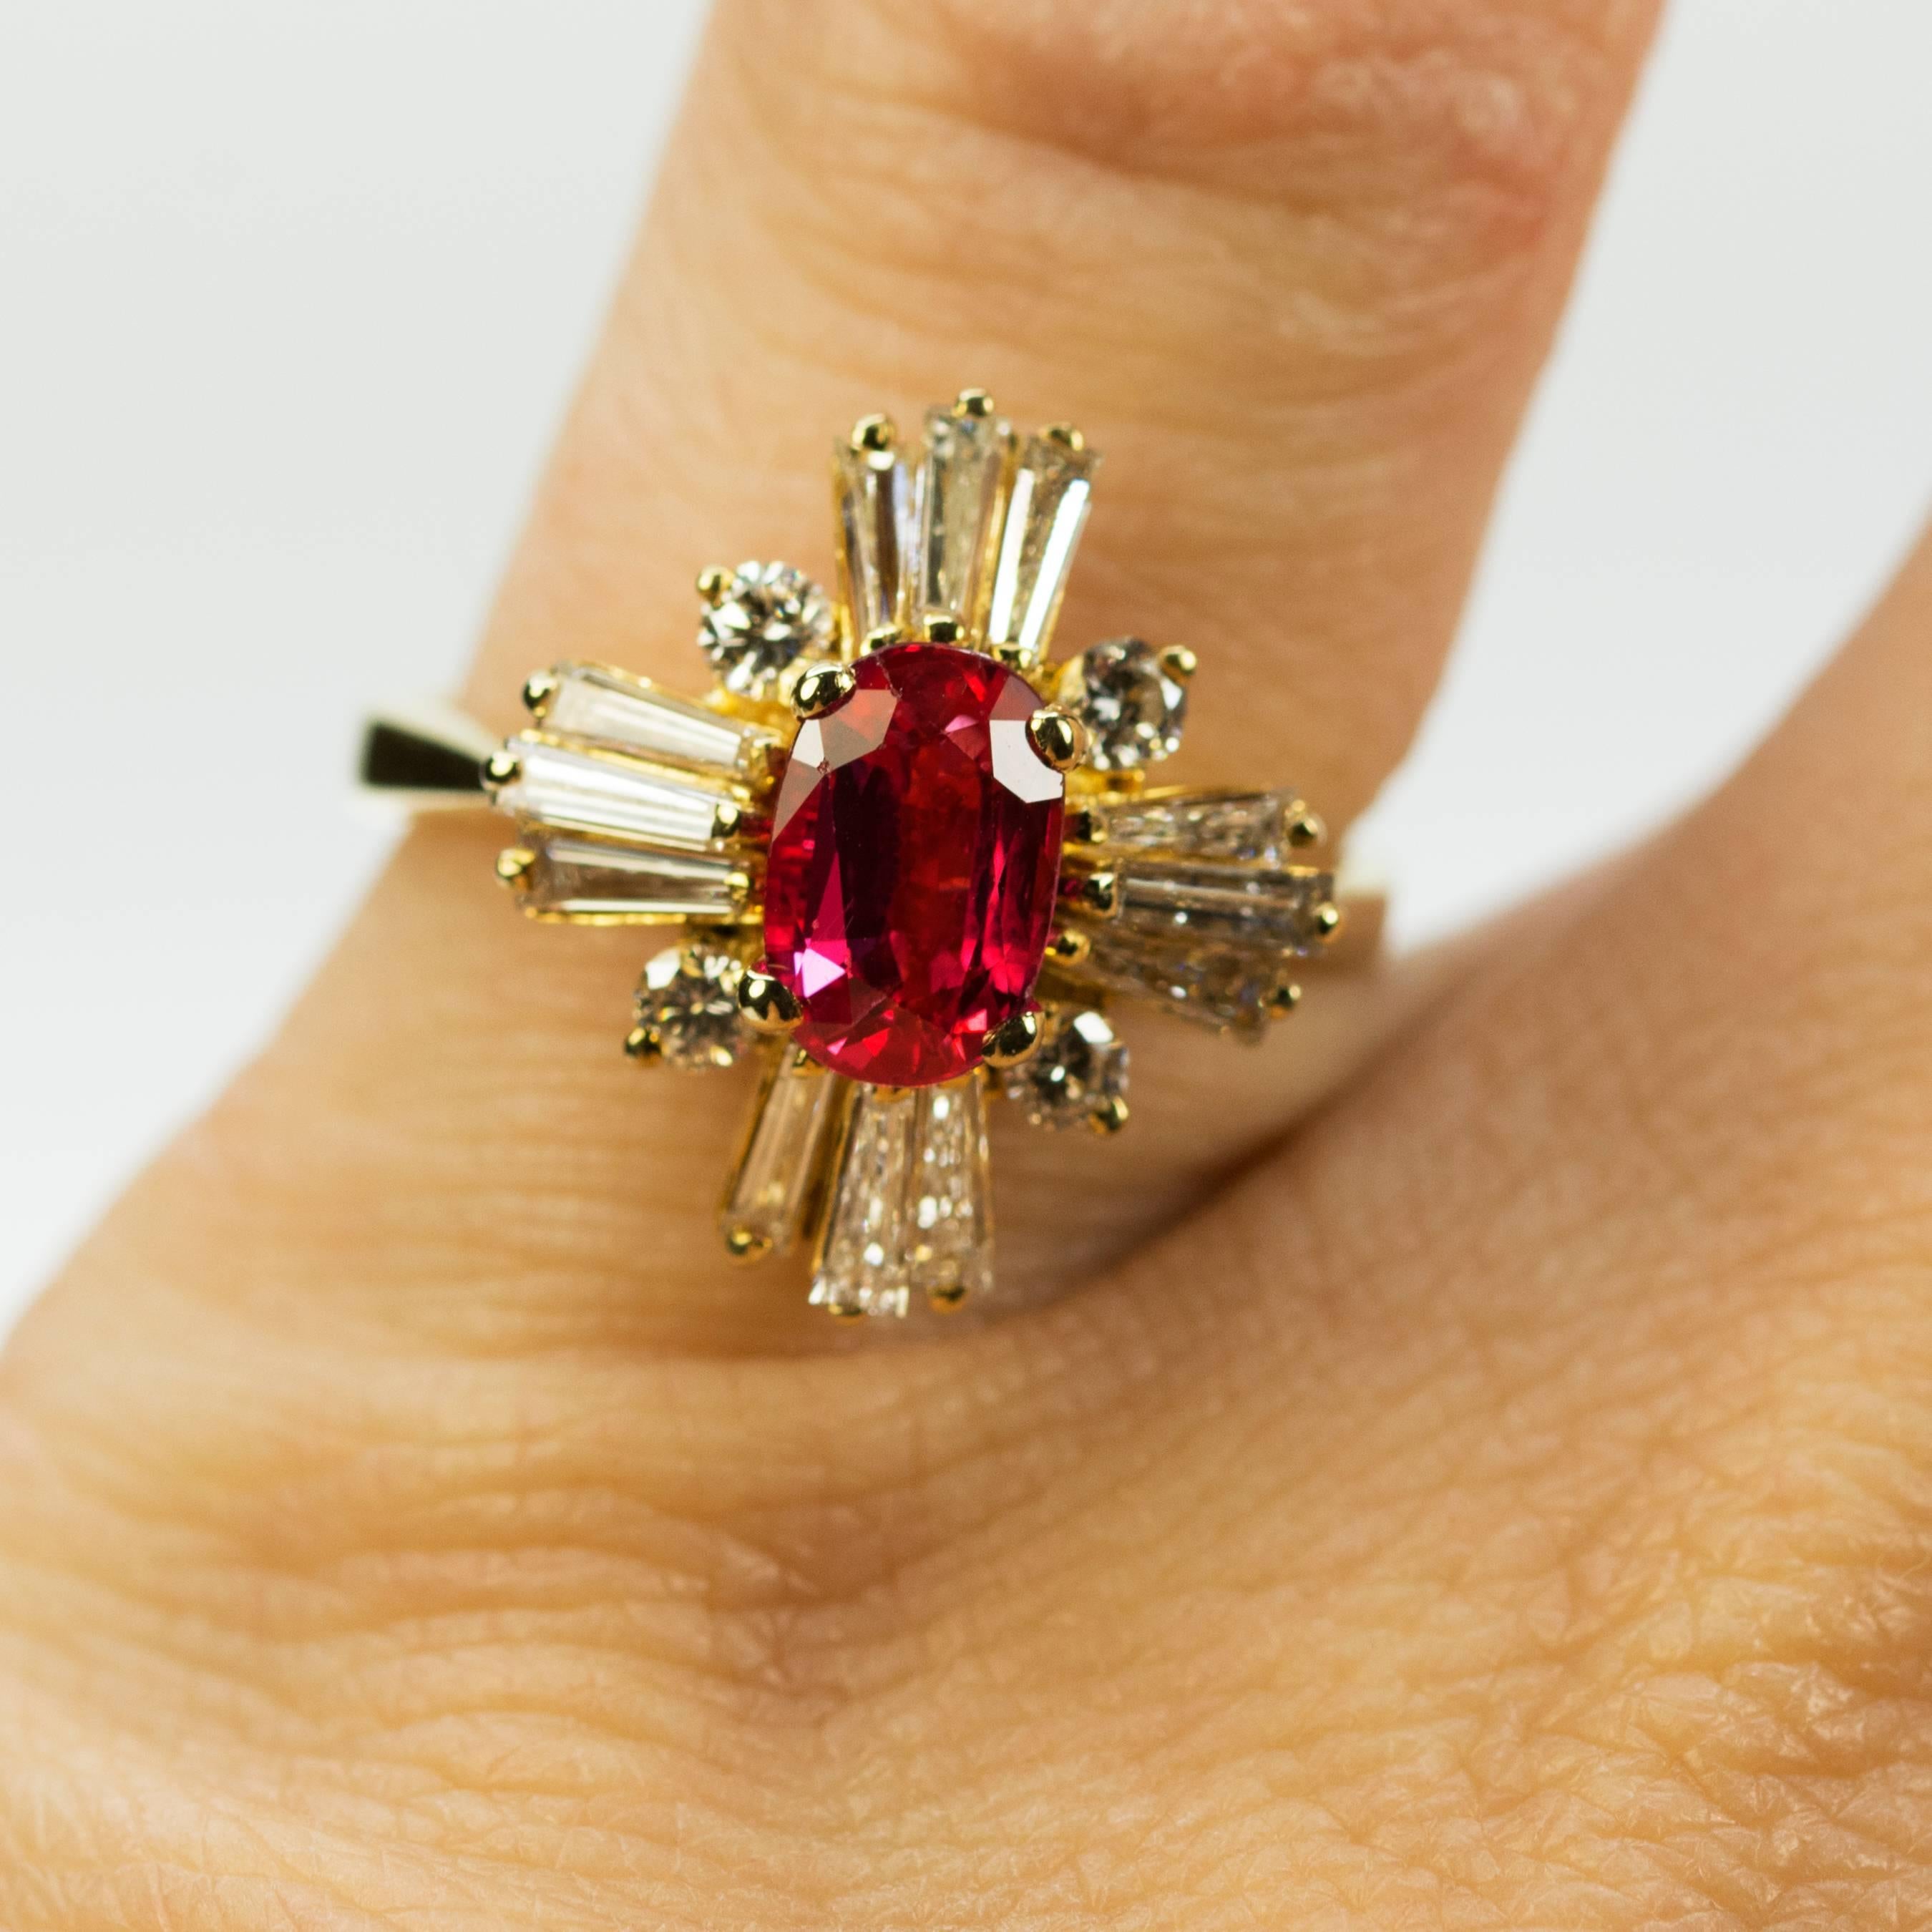 18k Ring with GIA certified 1.32 carat ruby and baguette cut and round diamonds weighing approximately 1.00 carats. 5.62g